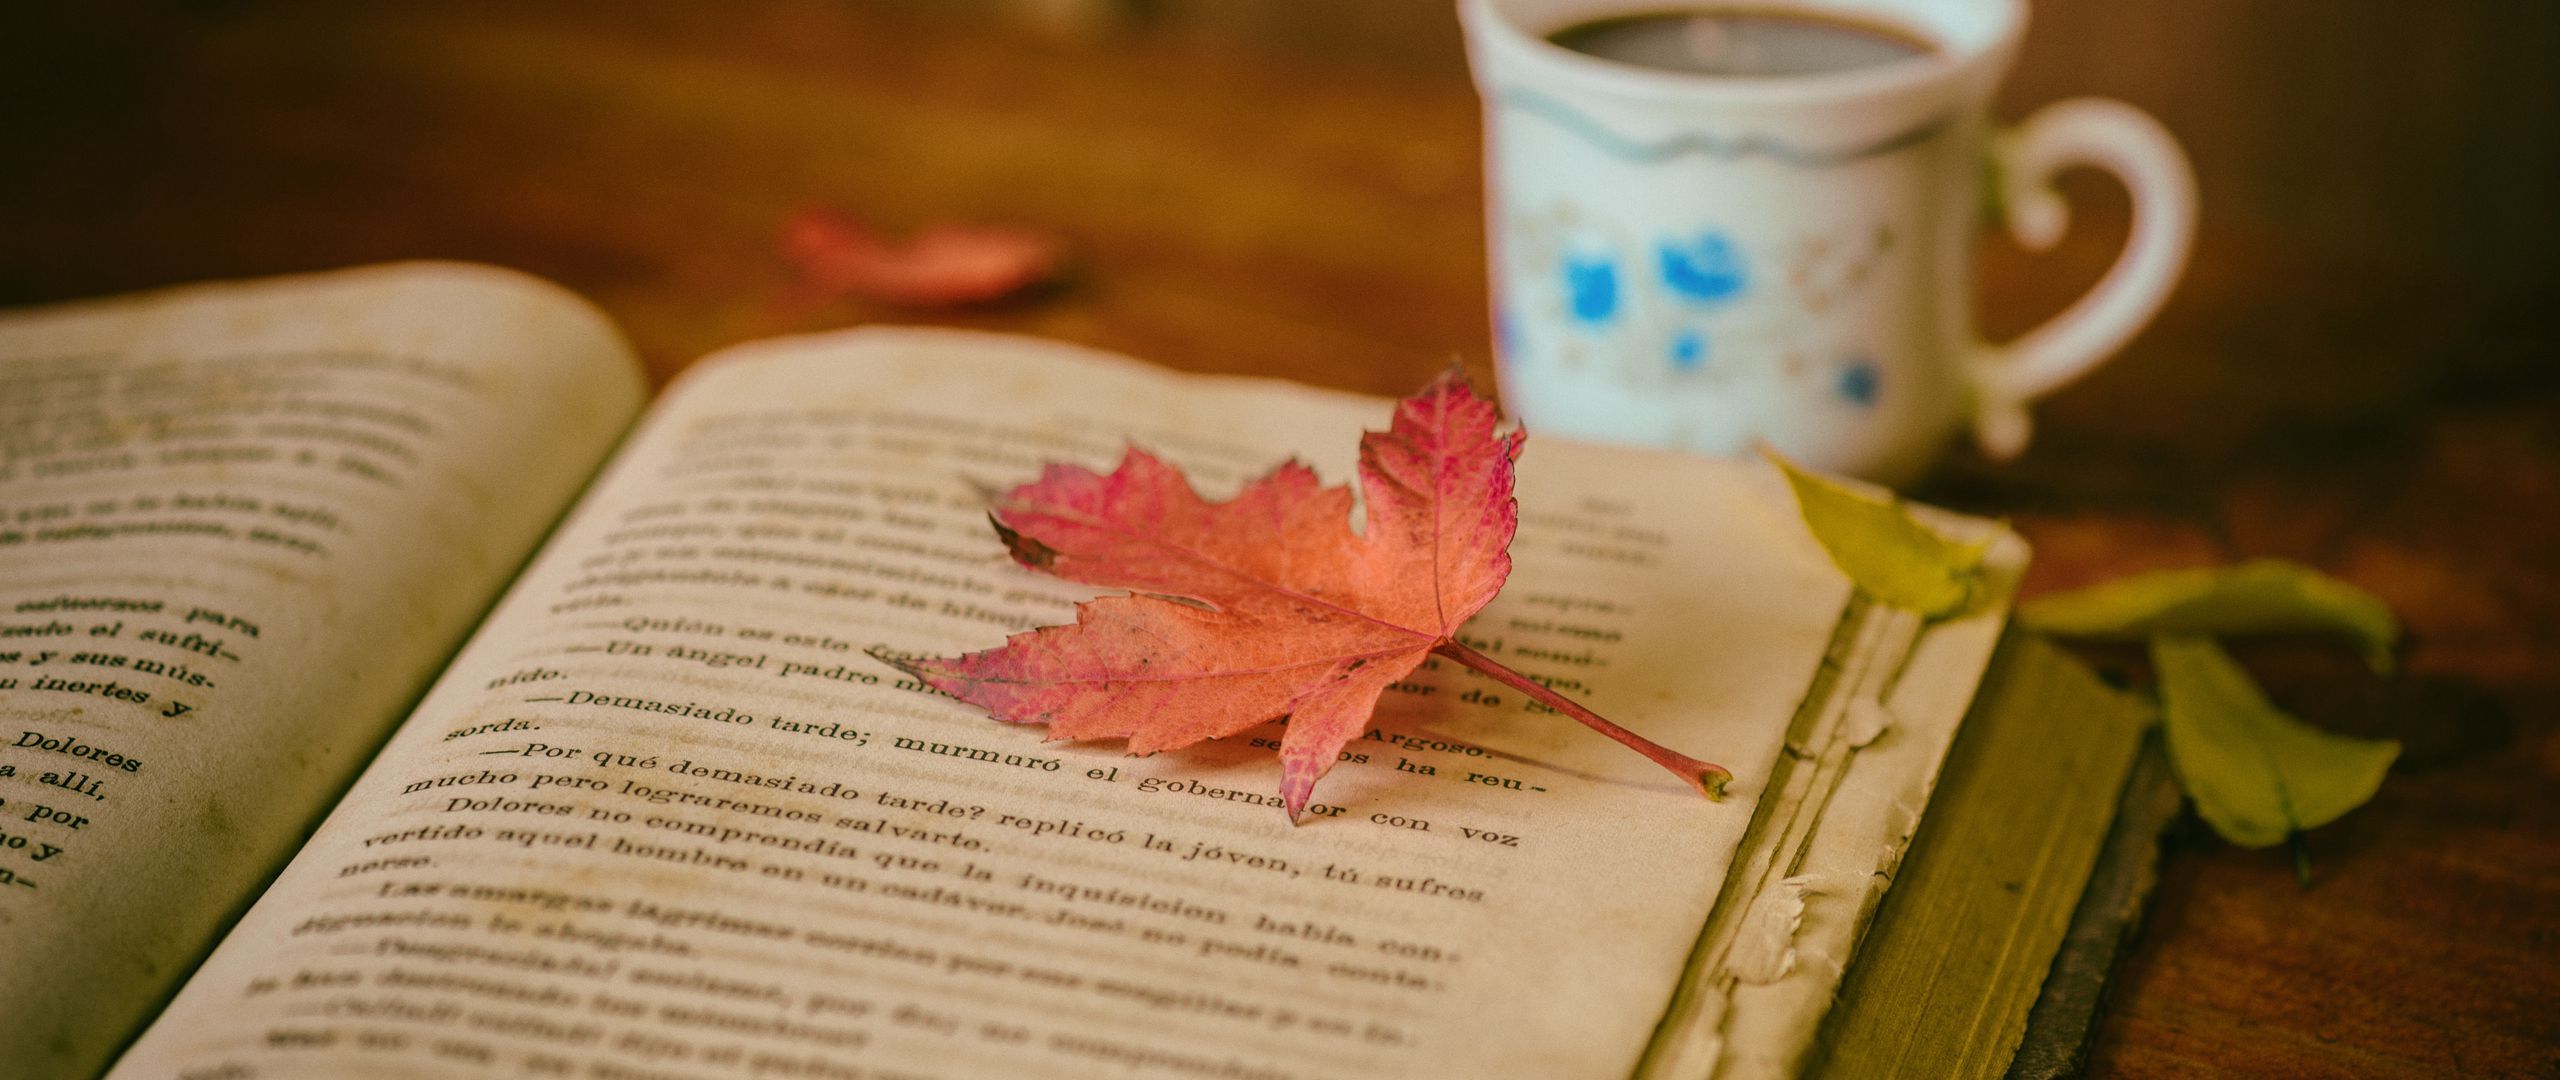 Download wallpaper 2560x1080 book, leaves, cup, autumn, comfort, reading, coffee dual wide 1080p HD background